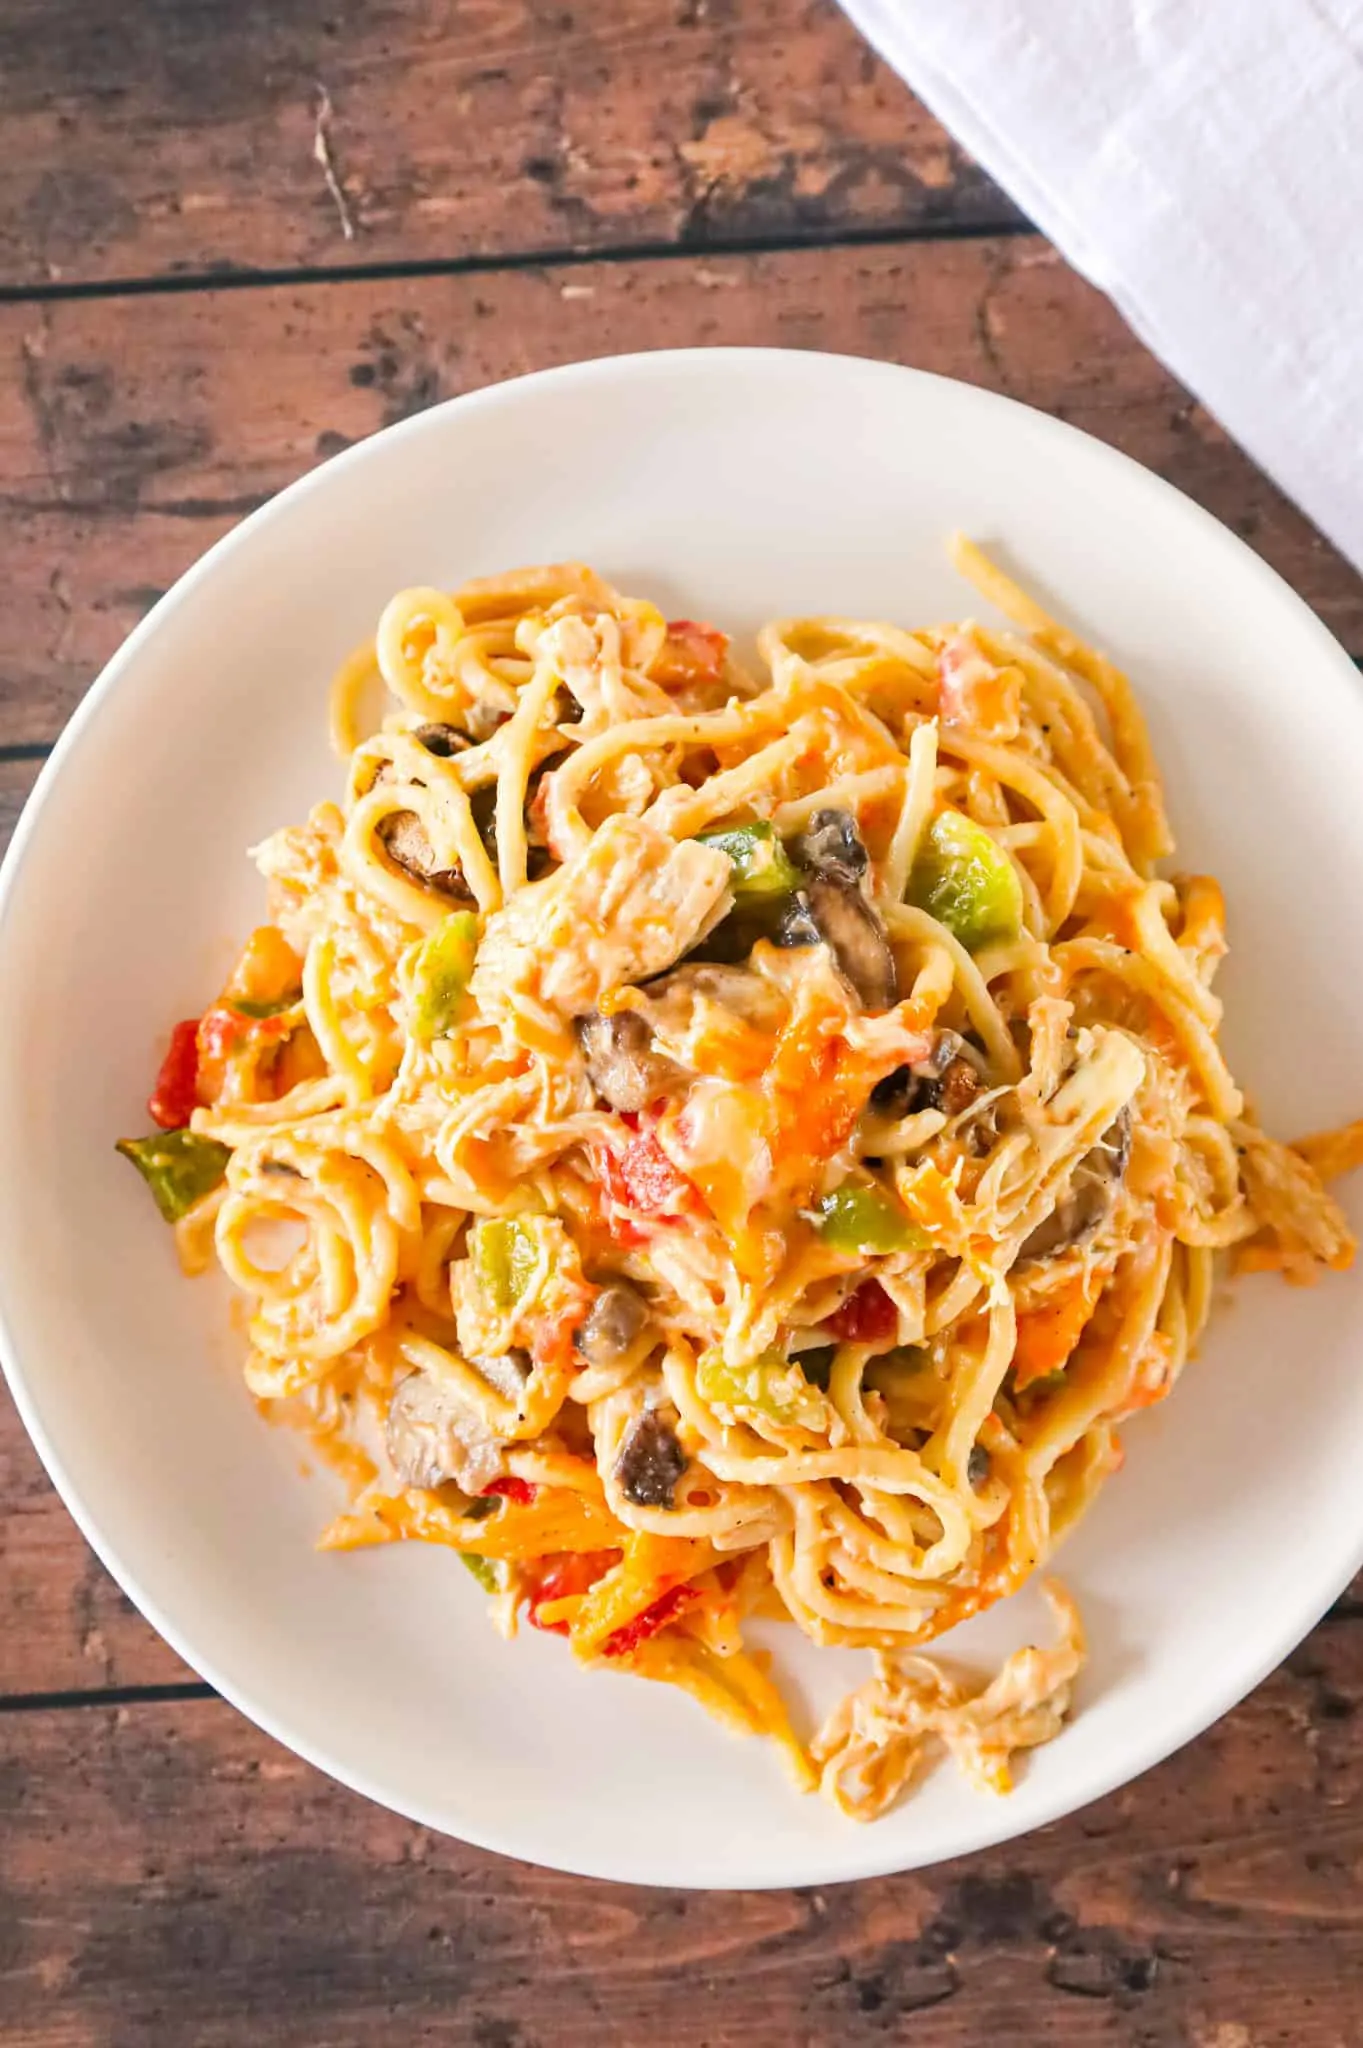 Texas Chicken Spaghetti is a hearty baked pasta recipe loaded with shredded chicken, cream of mushroom soup, cream of chicken soup, Rotel diced tomatoes and green chilies, diced green peppers, sliced mushrooms and shredded cheese.